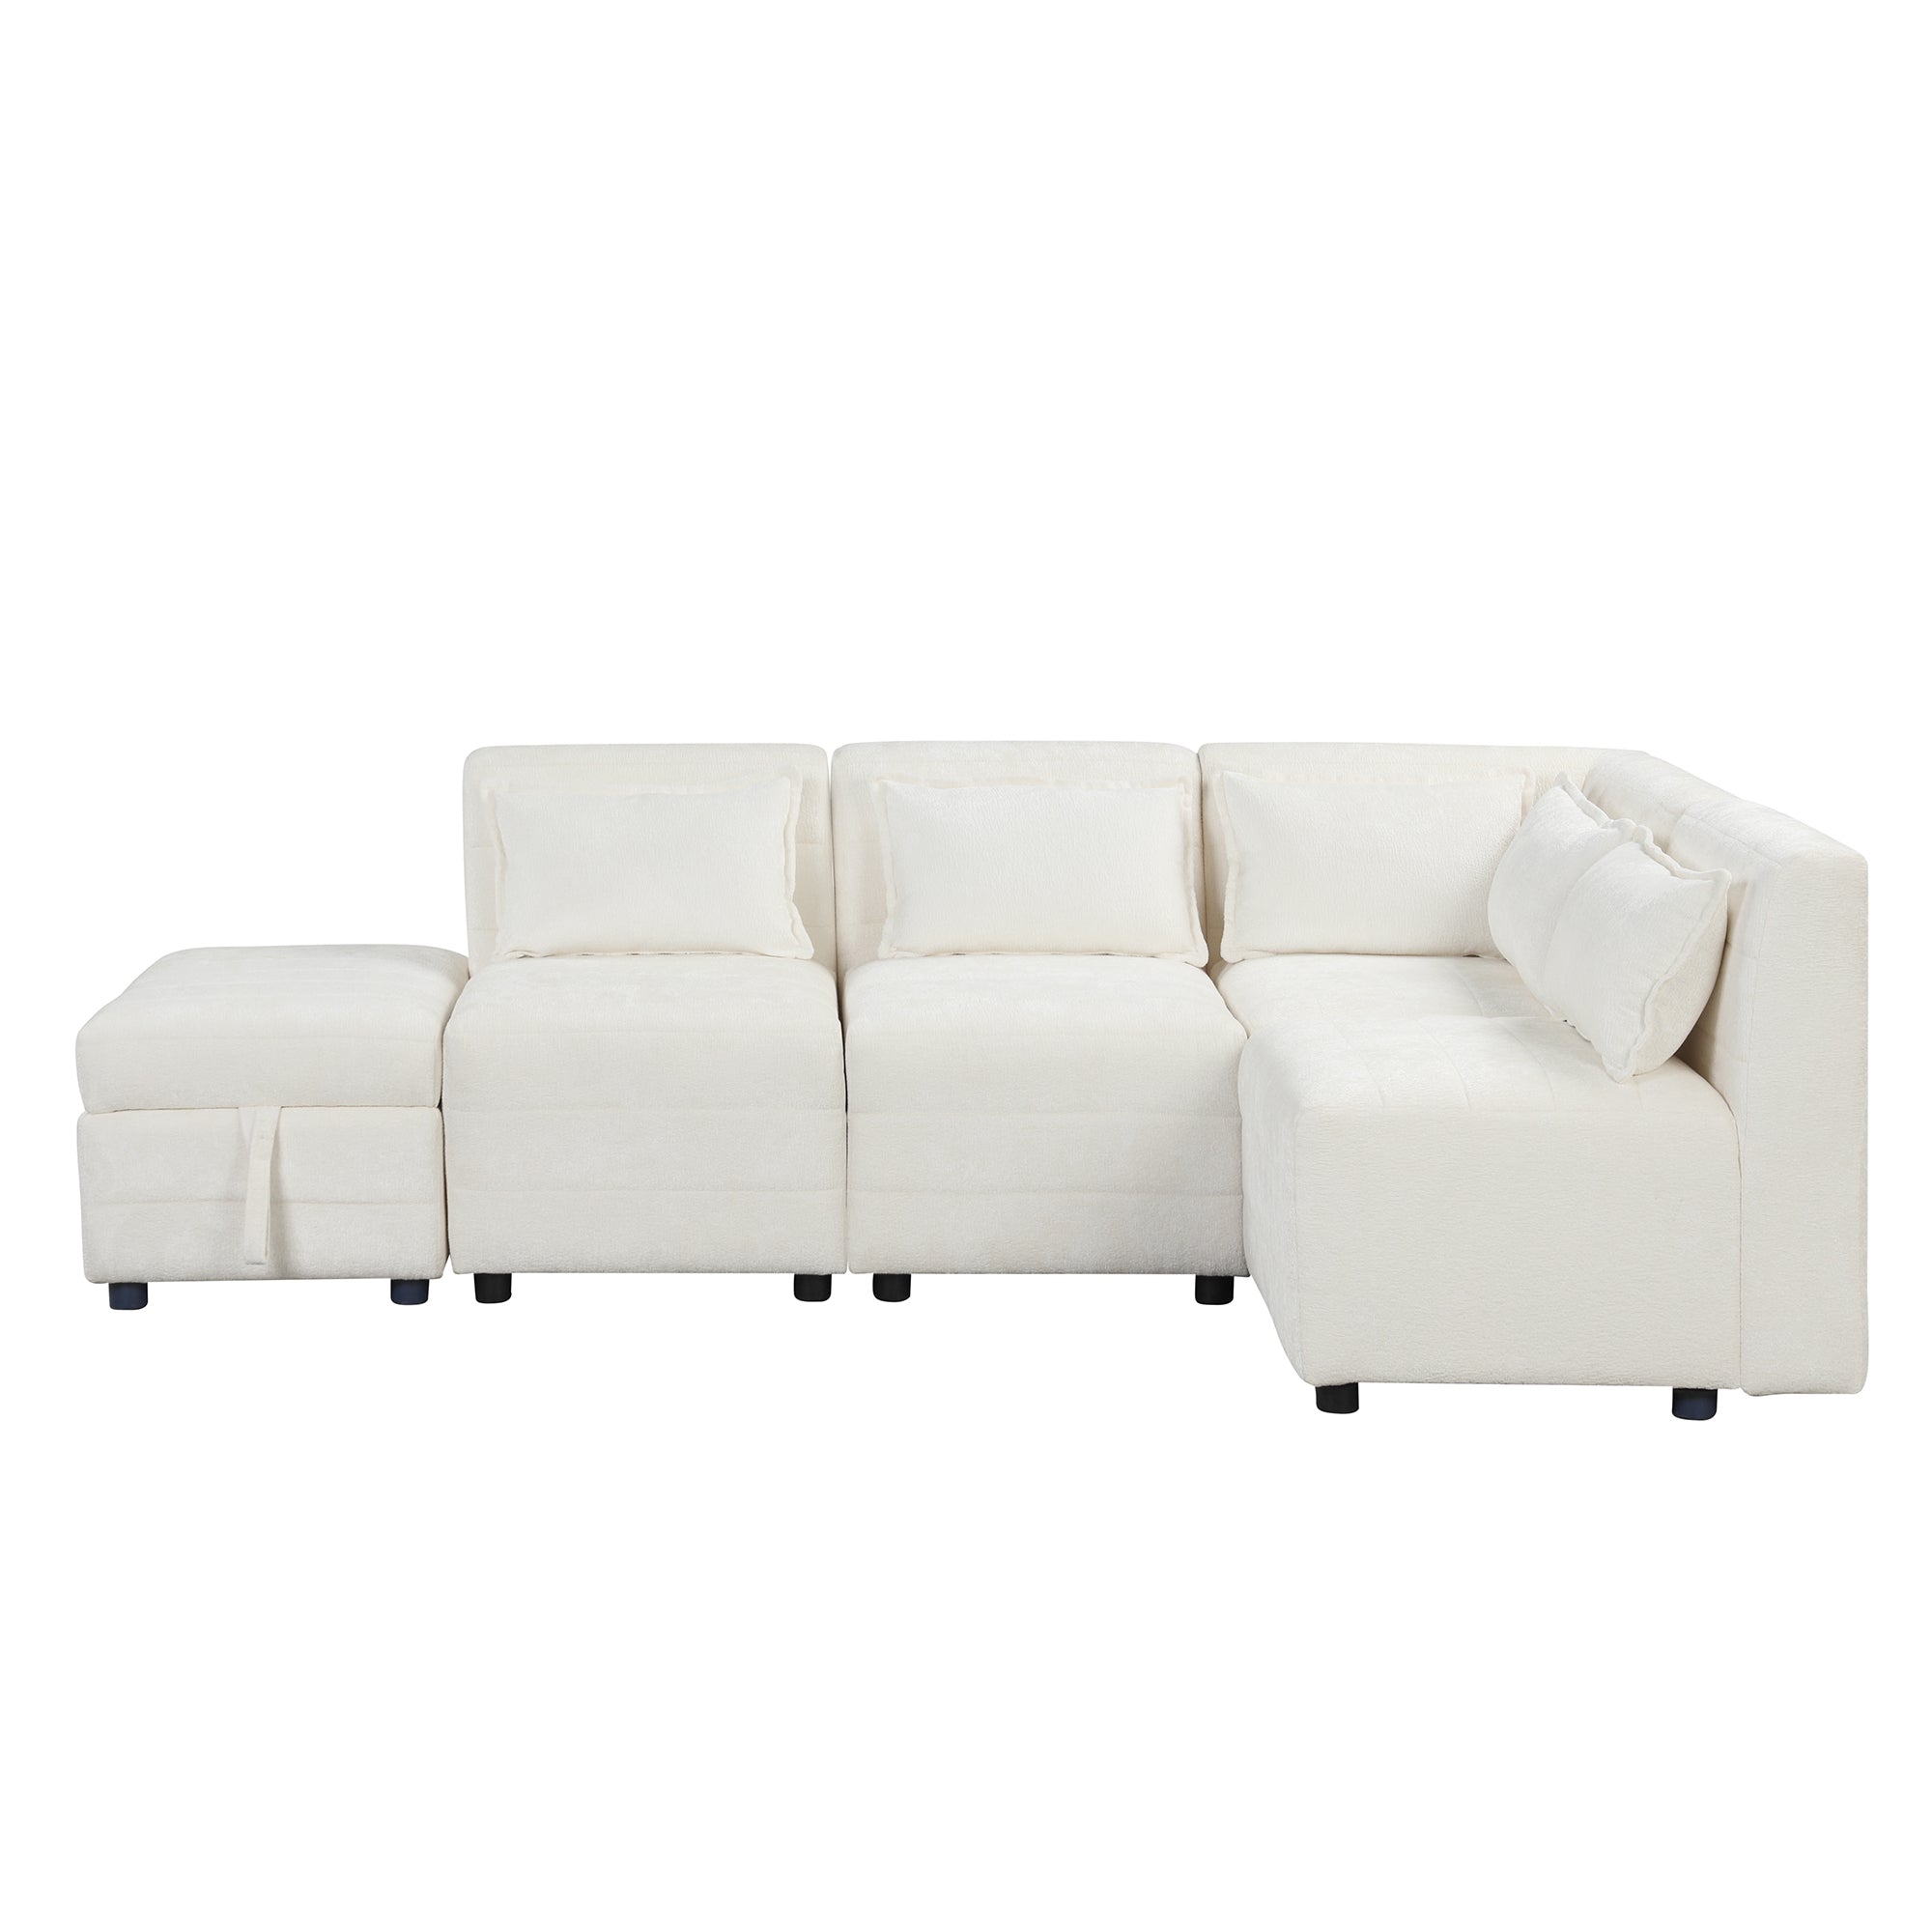 Free-Combined Sectional Sofa 5-seater Modular Couches with Storage - 6190f8f9486c439aa27d4bcfe7f89e6f